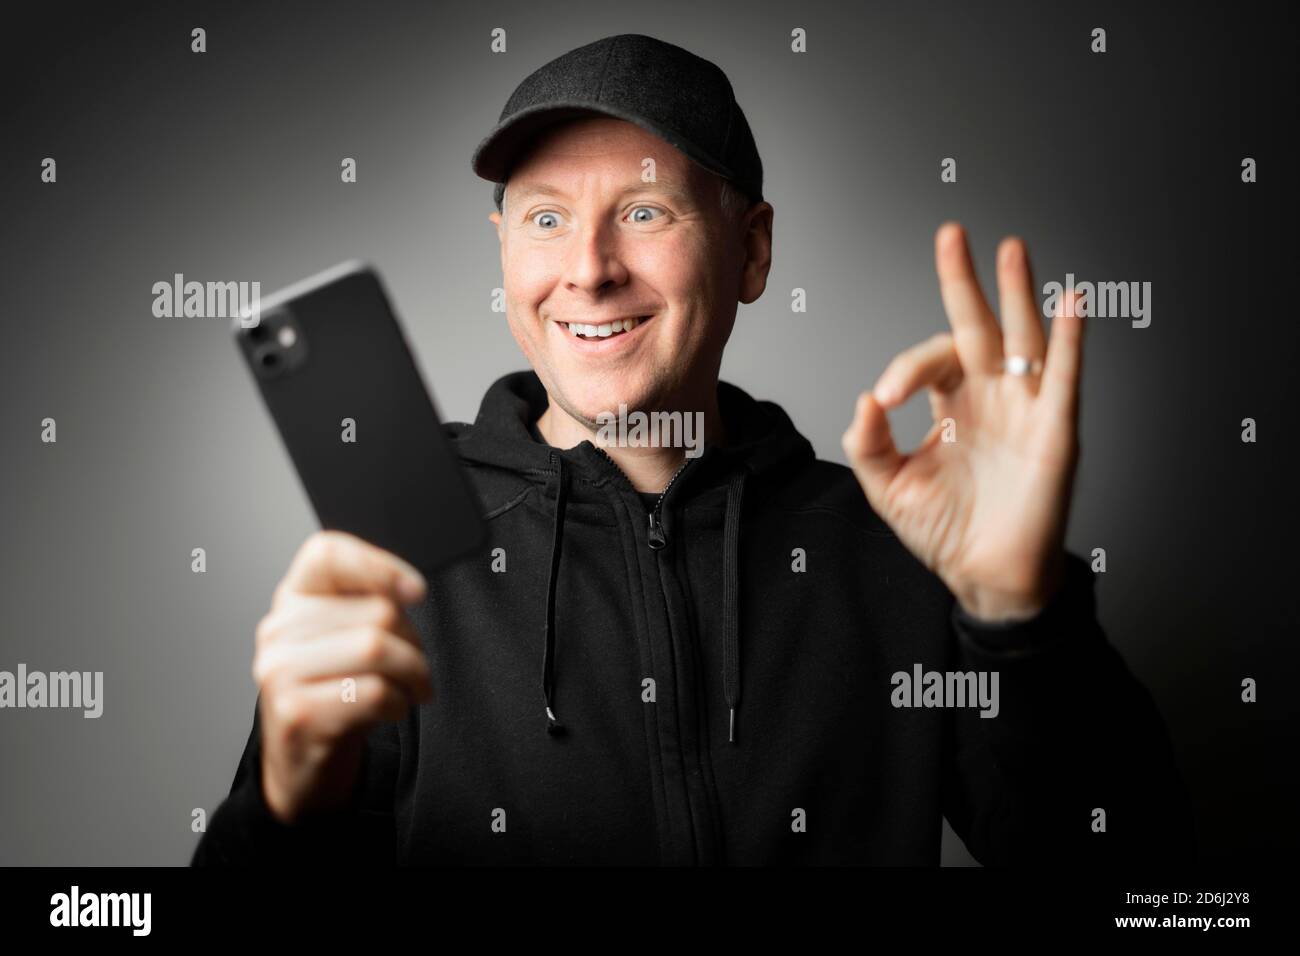 Man in black clothes happy with the message on the phone or the phone itself Stock Photo